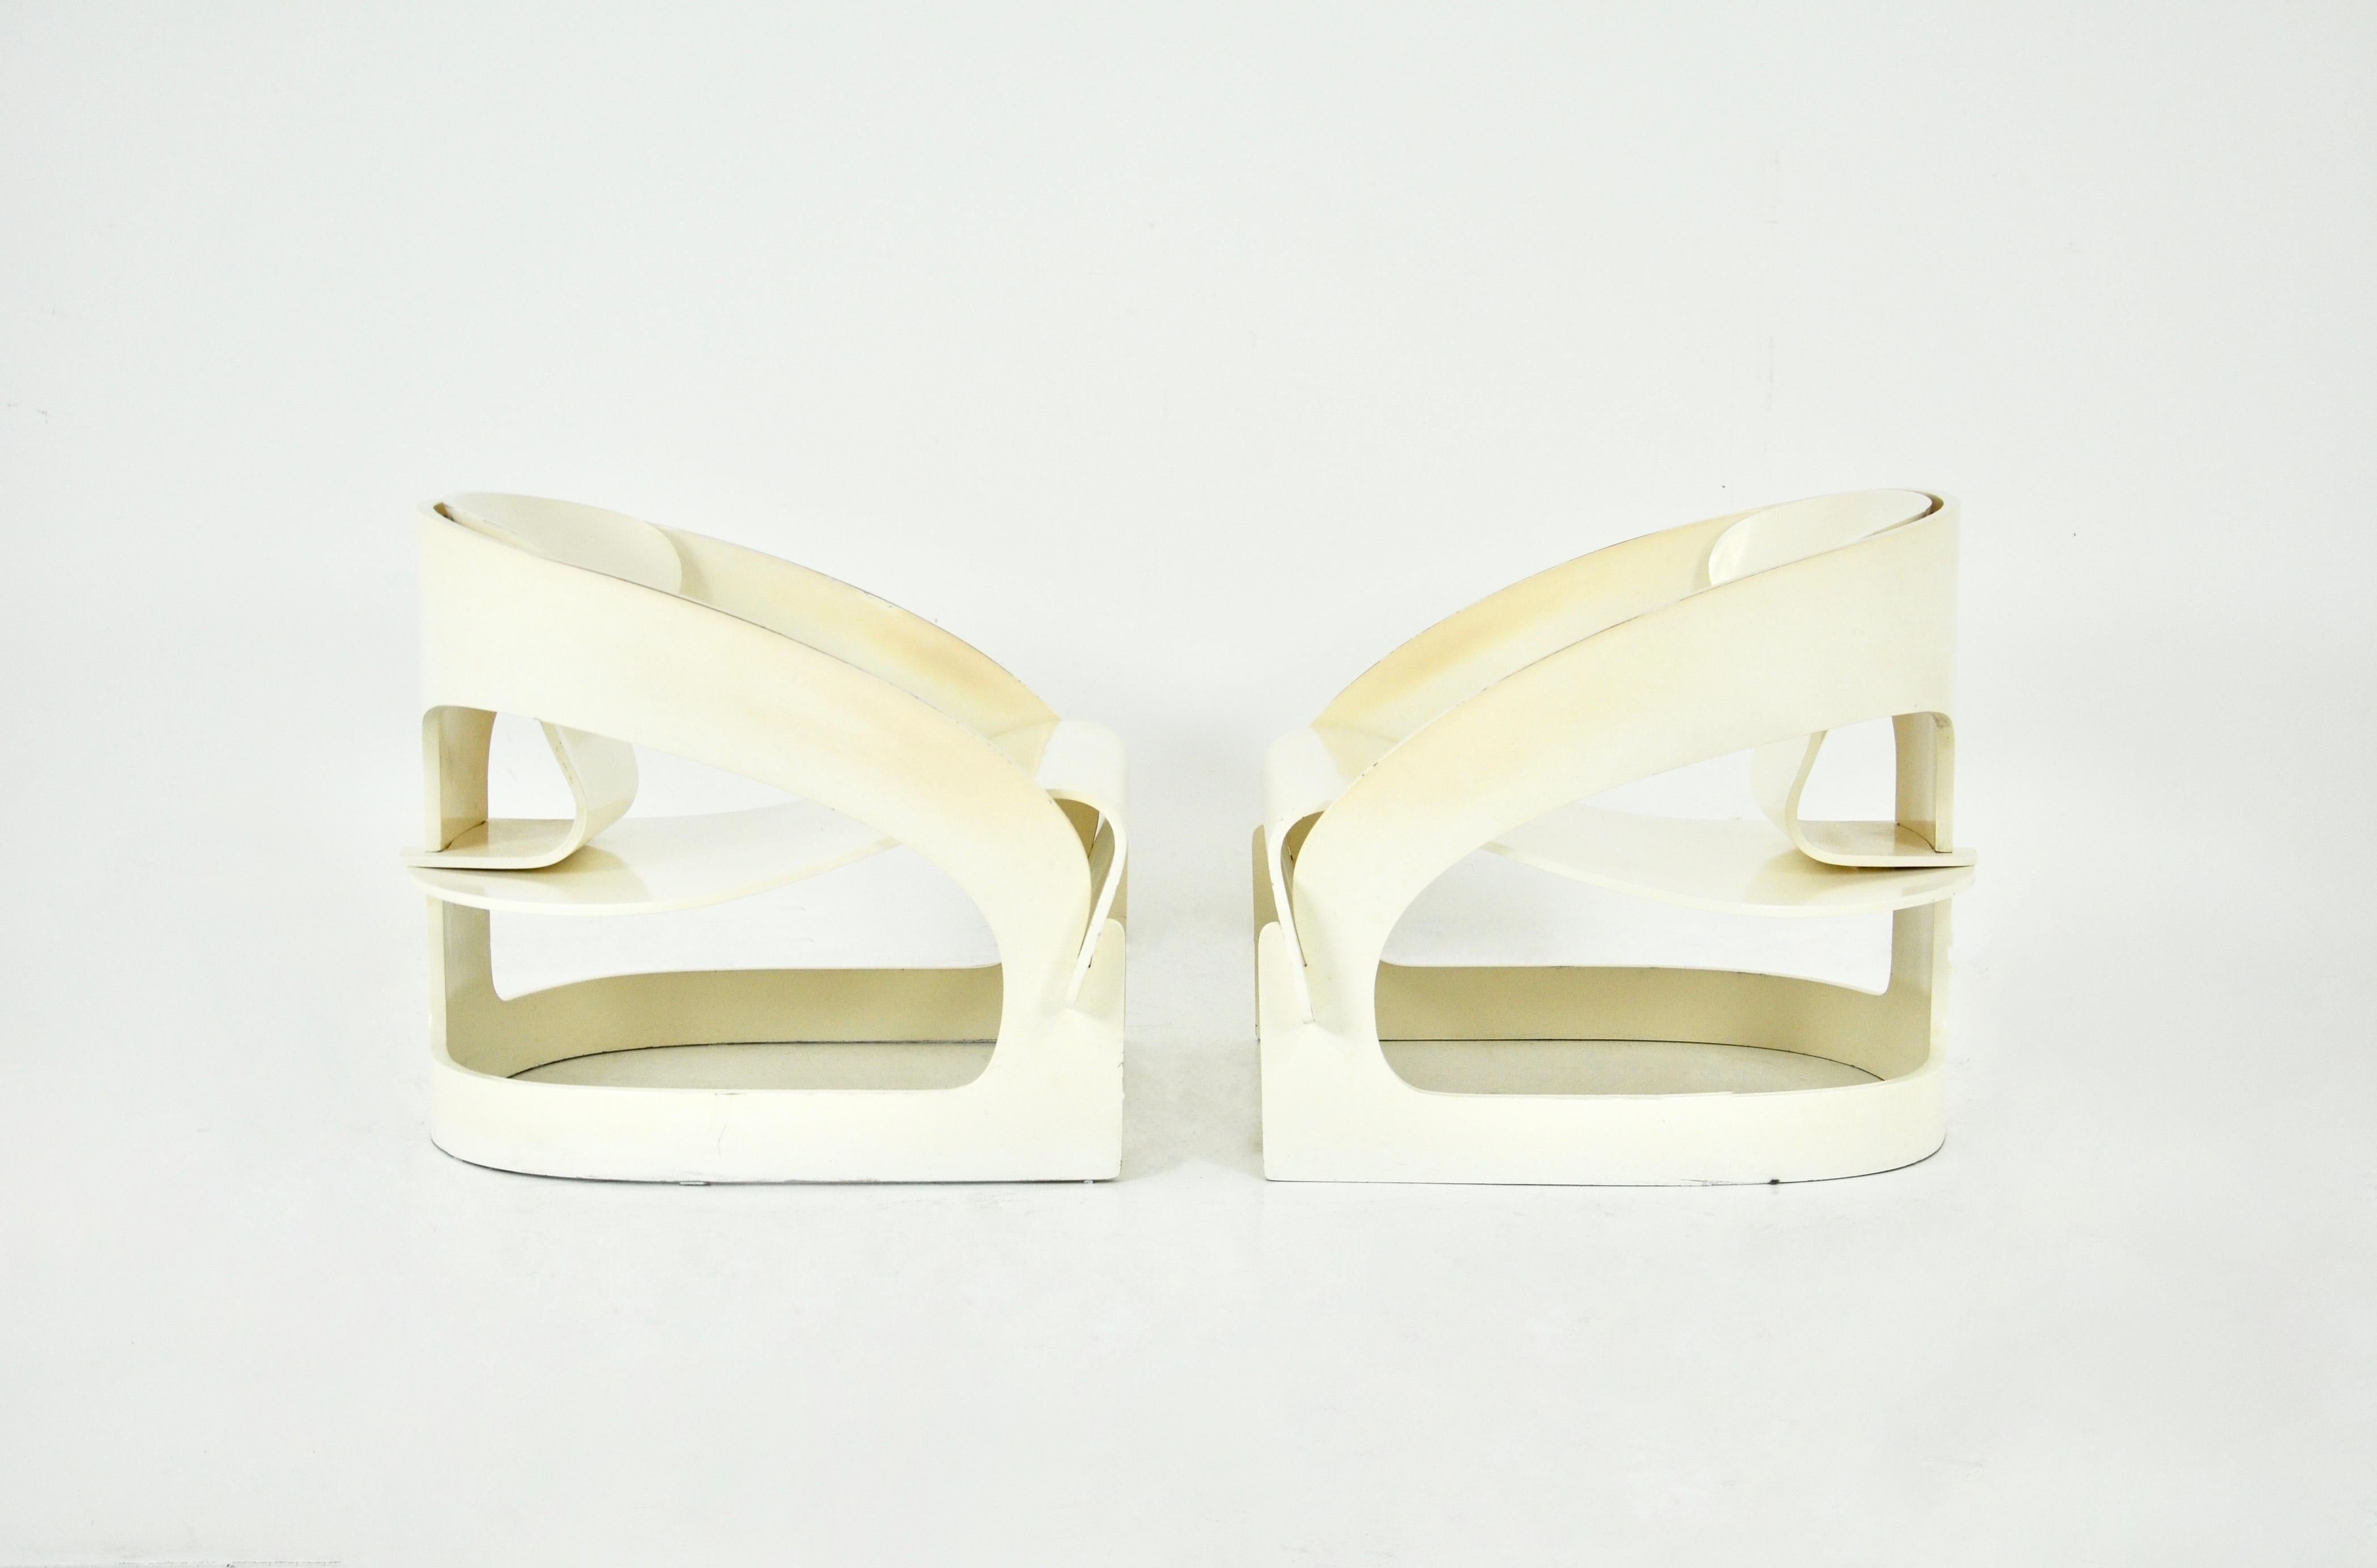 Wood Model 4801 Armchairs by Joe Colombo for Kartell, 1960s, set of 2